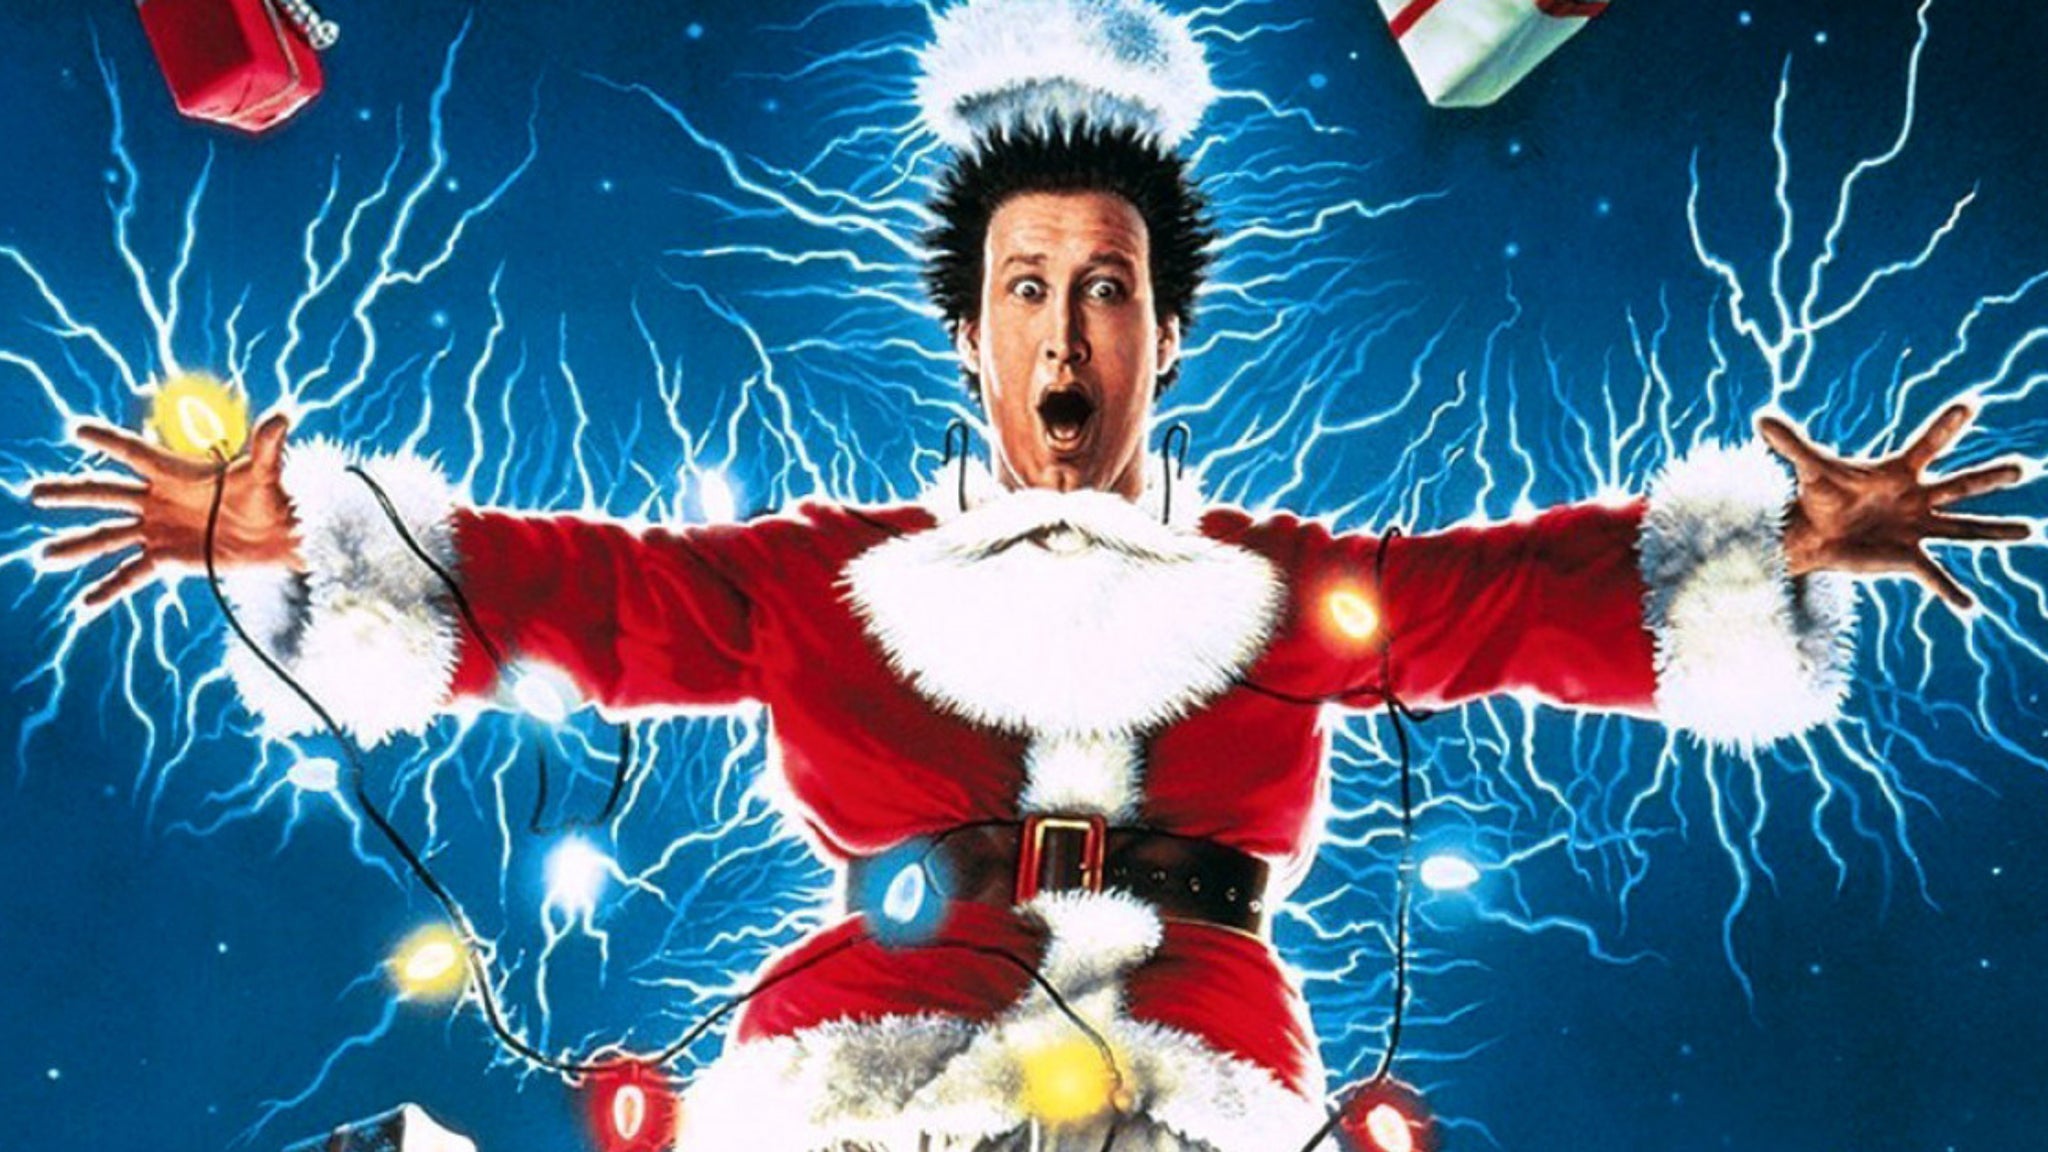 An Evening with Chevy Chase and National Lampoon's Christmas Vacation in Medford promo photo for Official Platinum presale offer code